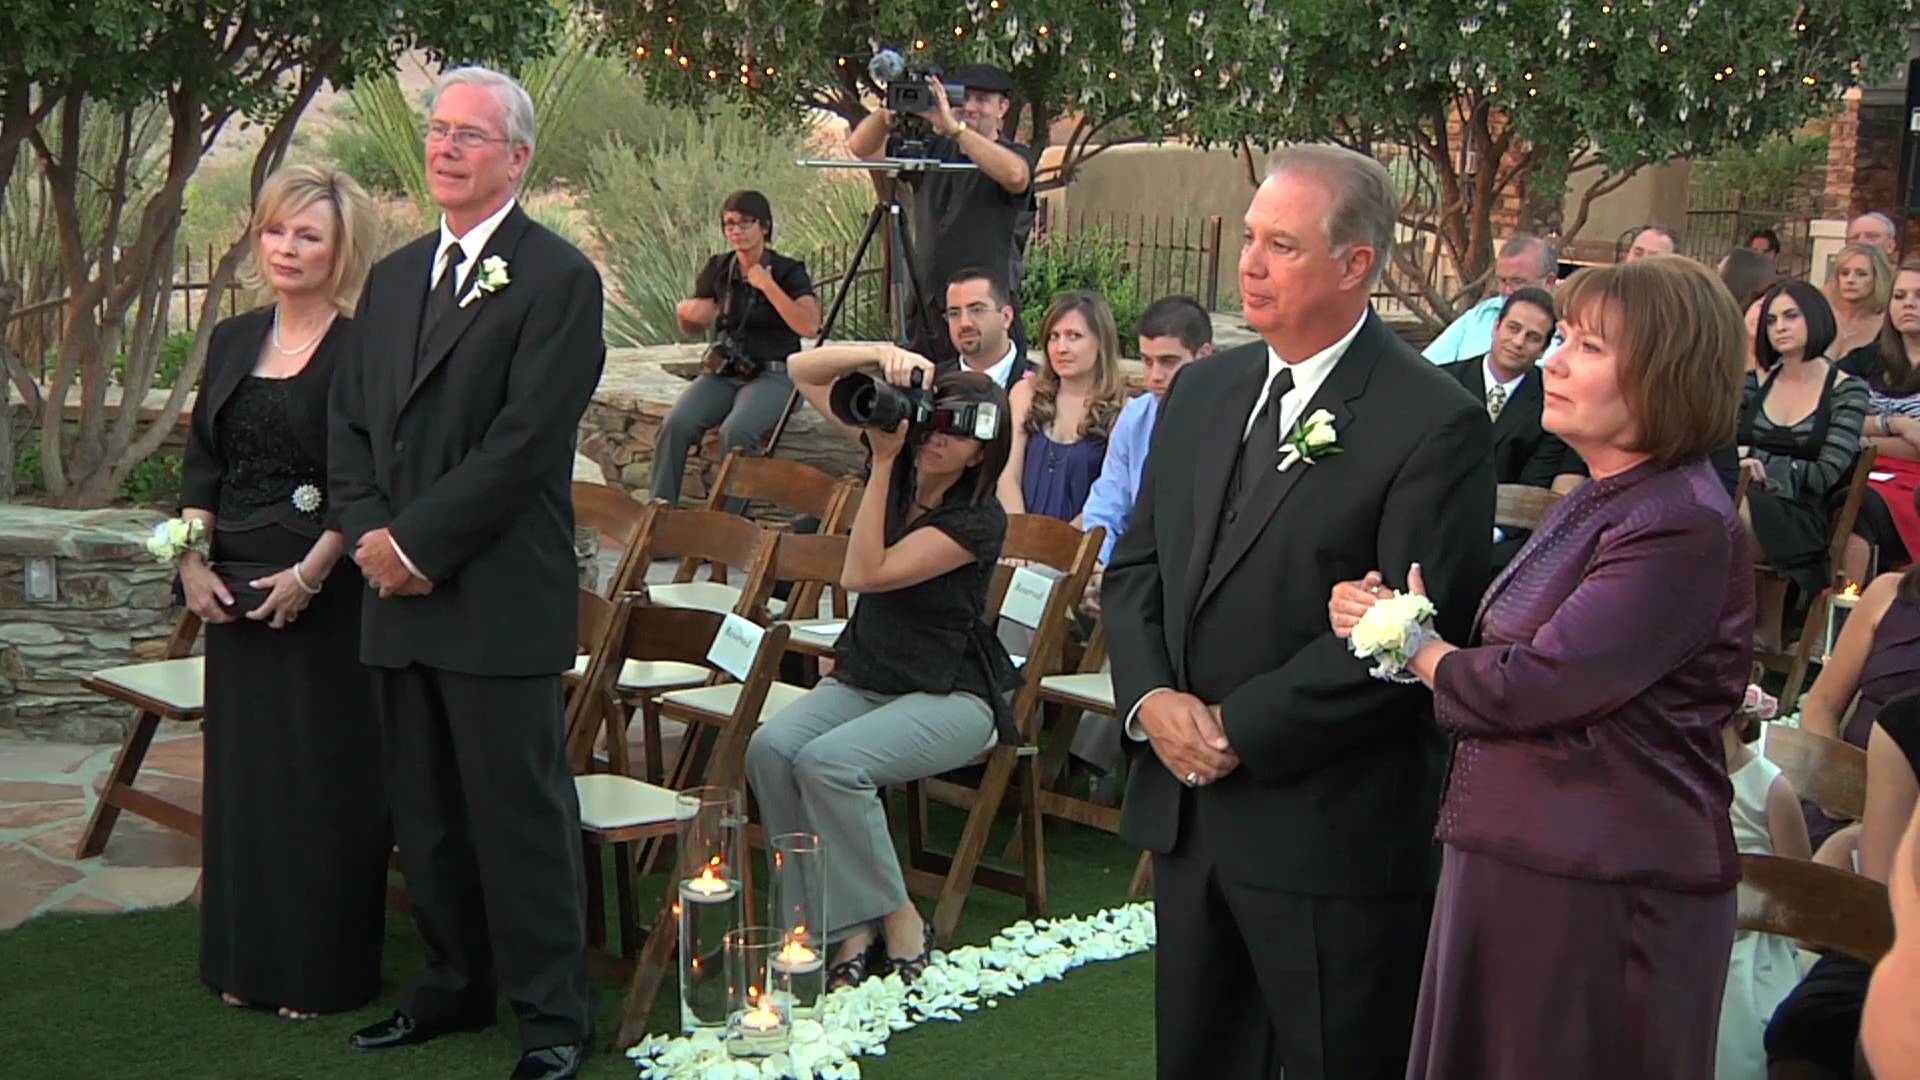 Surprise vow renewal for parents at daughter’s wedding